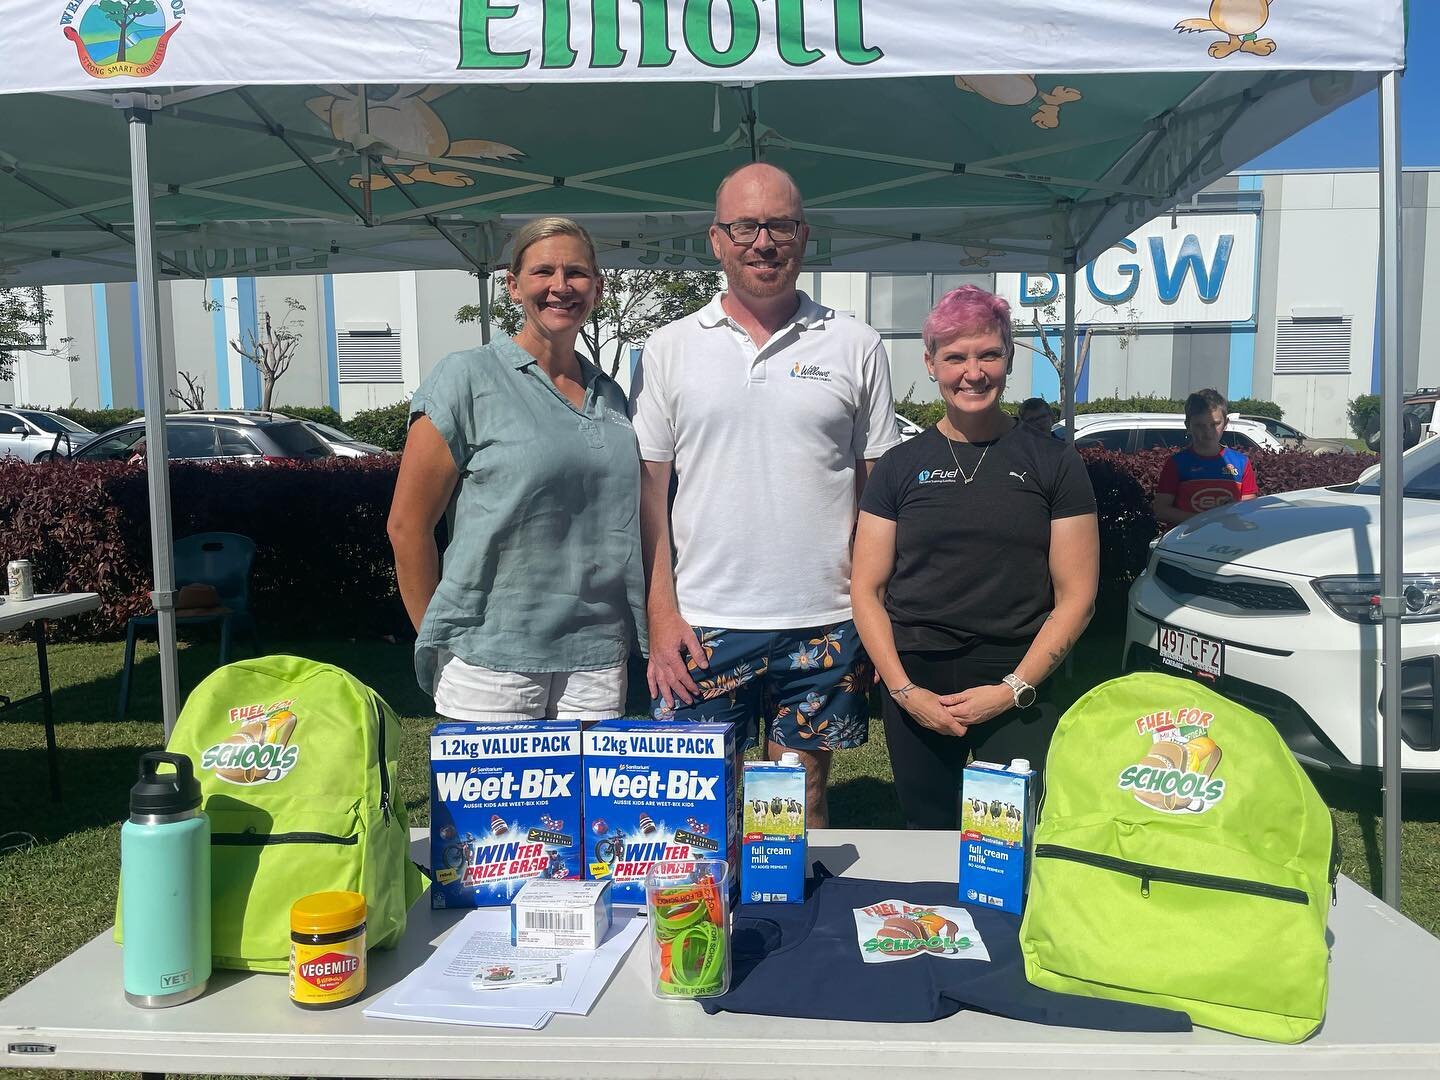 Great morning at the Willows Presbyterian Church Fair !!

Thank you so much for your support we are blown away !! 

#Fuelforschools #supportlocaltownsville #townsvillelocal #northqueensland #nonprofitorganisation #charity #community #givingback #dogo